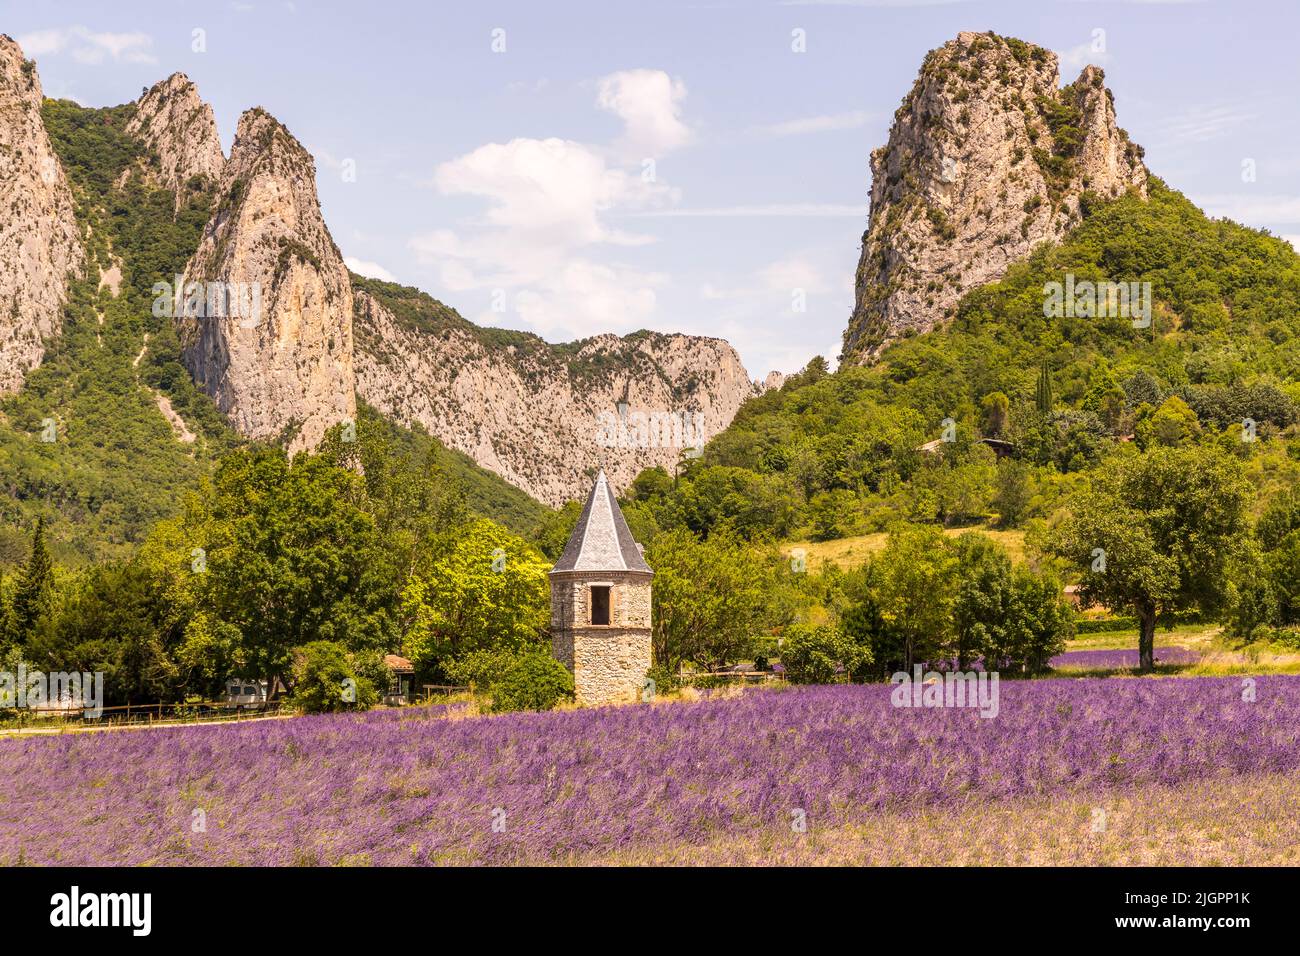 Lavender field with young and old plants in front of a tower and the foothills of the Vercors mountains in France, Drome valley Stock Photo